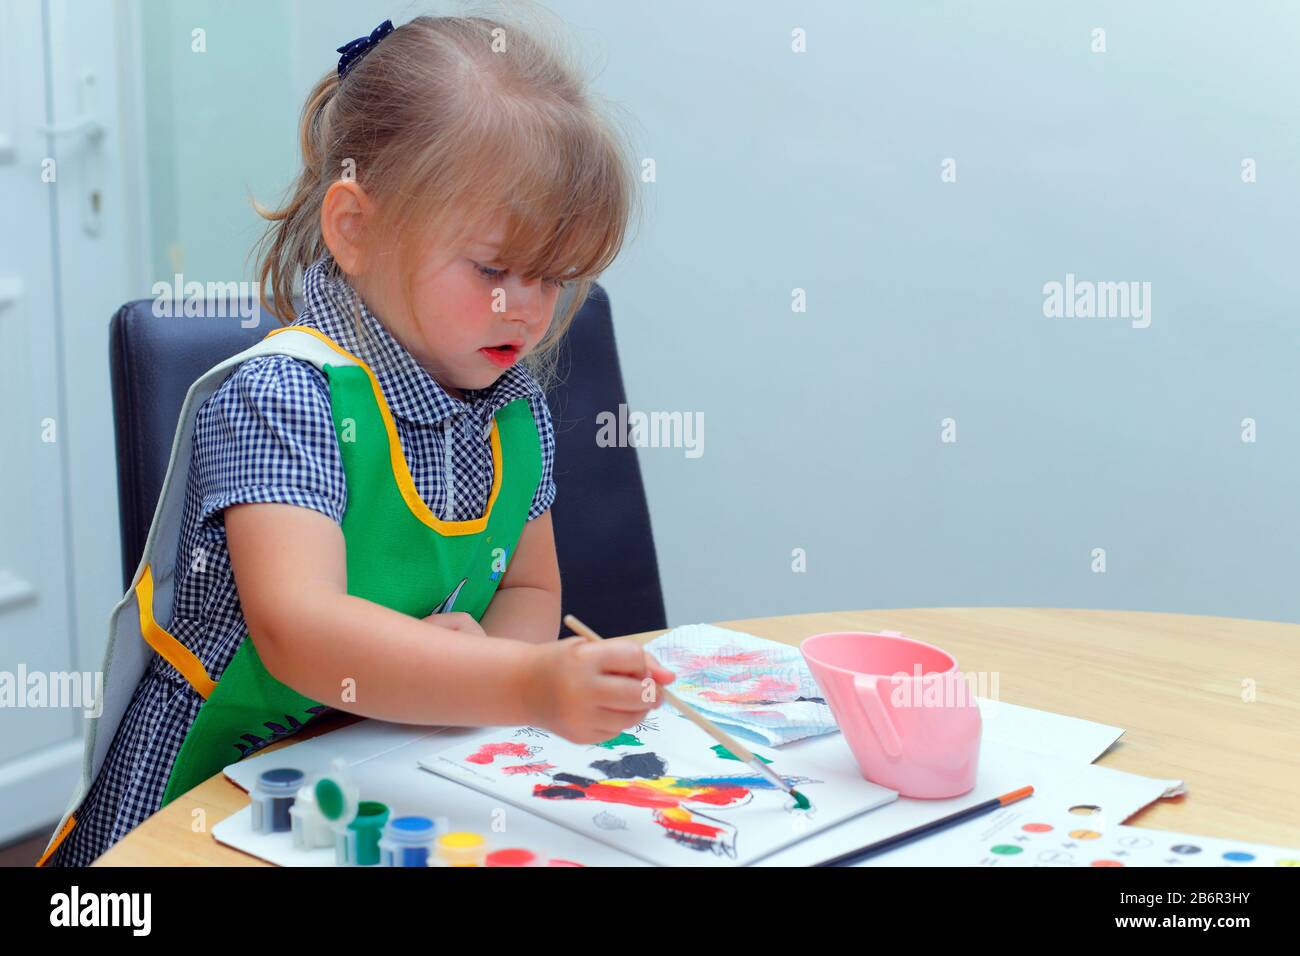 A little girl using a brush to paint a picture Stock Photo